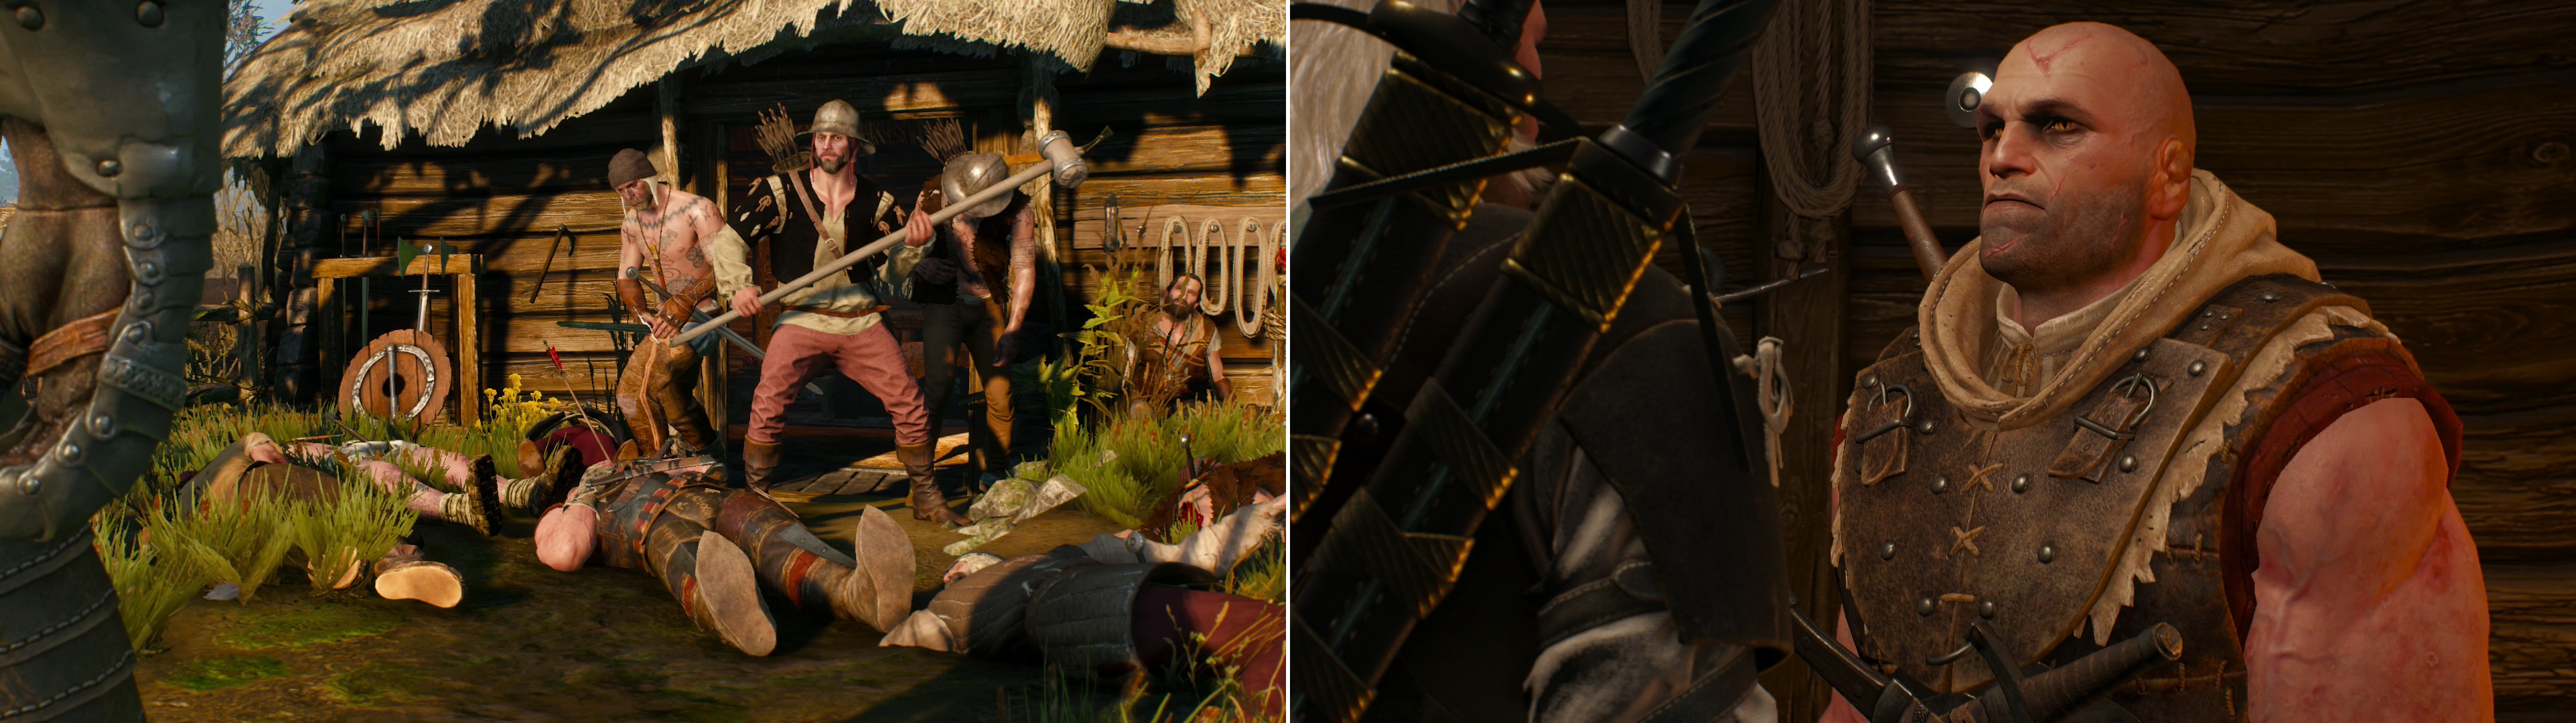 Letho's confrontation with his hunters doesn't seem to go well for the Witcher (left). If you avoid conflict as Letho directed, you'll be able to ask him to lay low at Kaer Morhen (right).